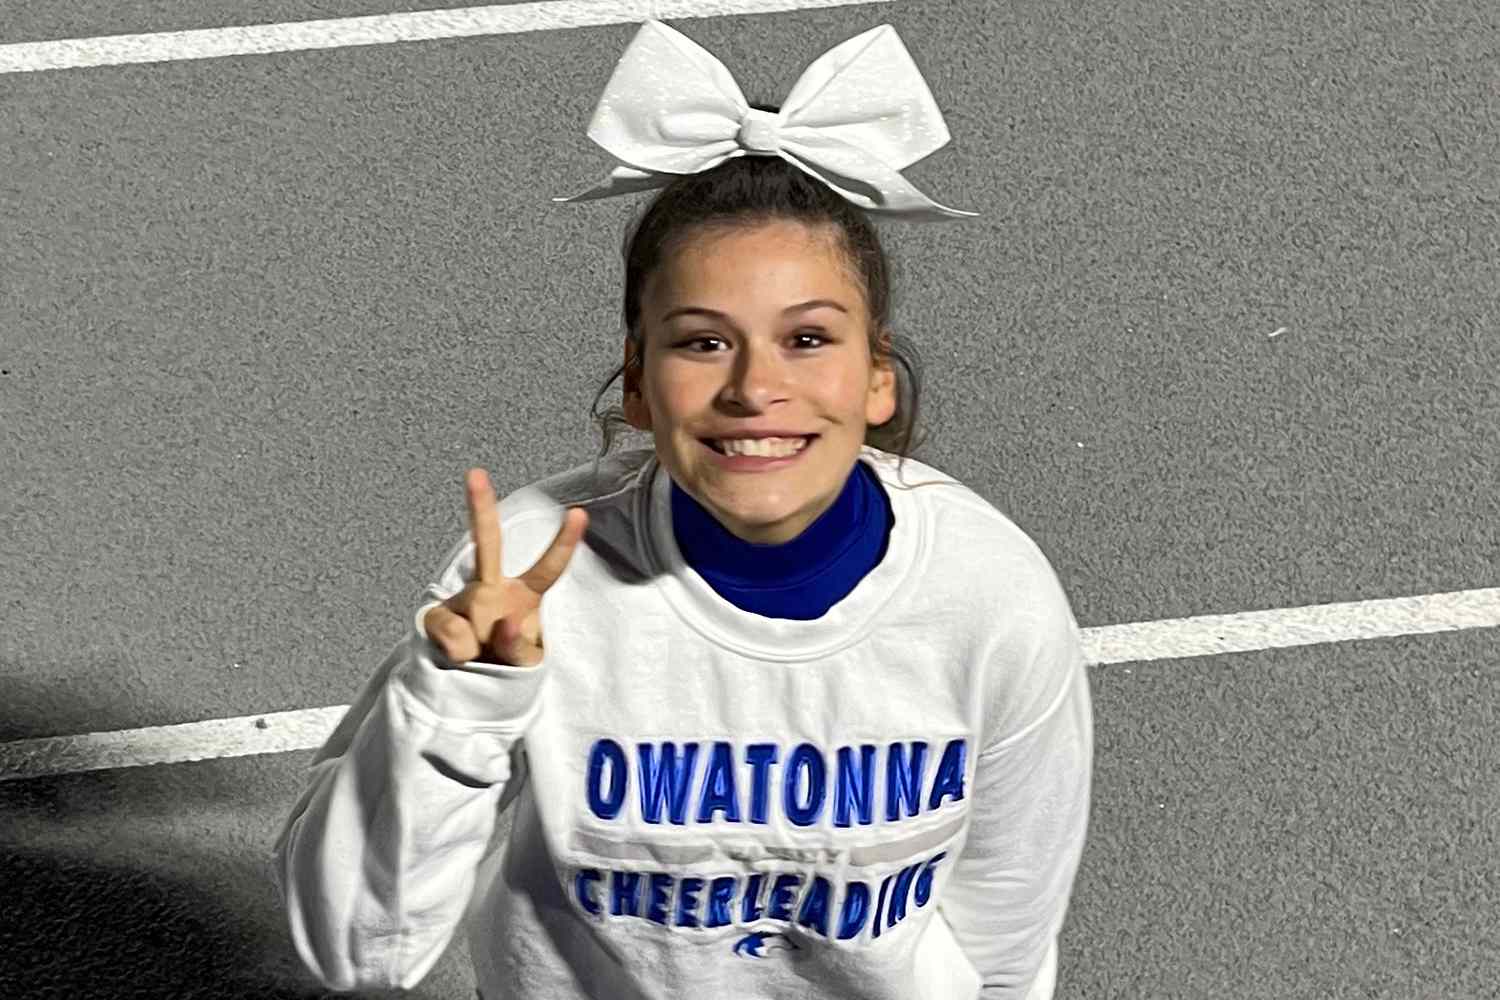 Cheerleader Who Was Weeks from Graduation Dead After 'Tragic' Crash Involving Cop Car: 'Special Young Lady'